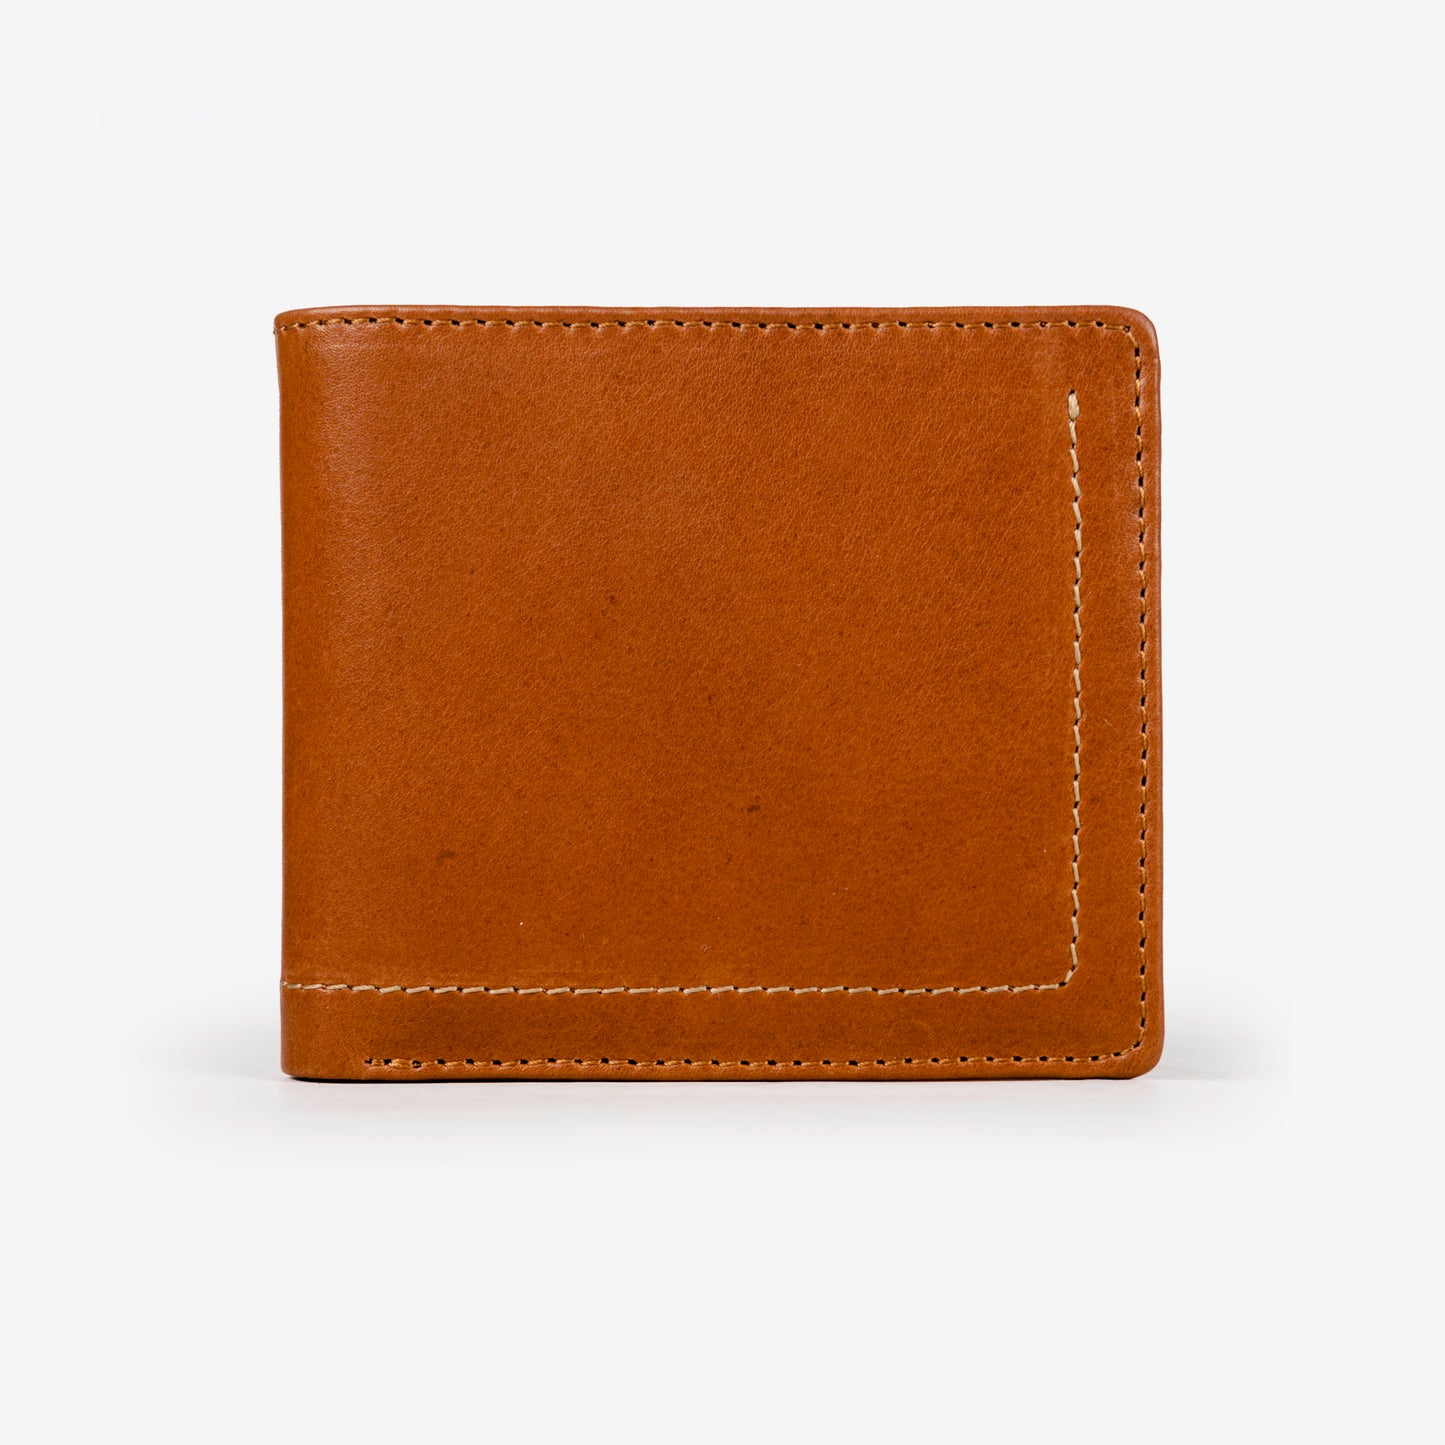 GT-TW4: Full-grain Leather Classic Men's Bifold Wallet with RFID